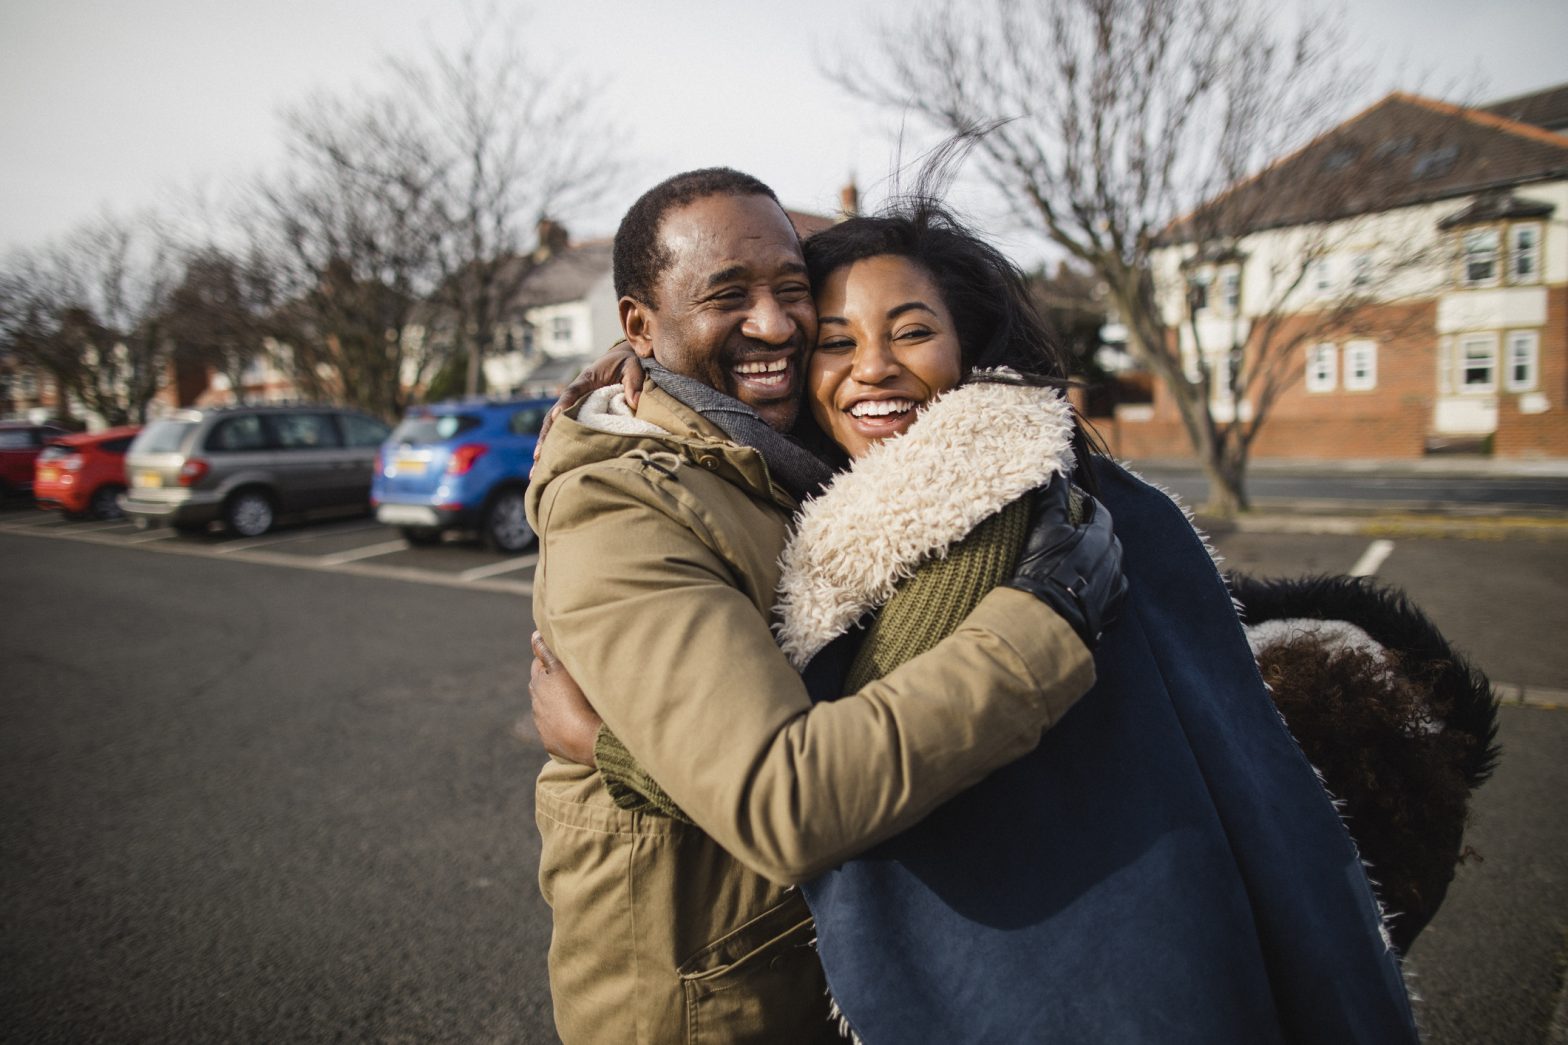 A father happily embracing his daughter as if they had just won the People's Postcode Lottery